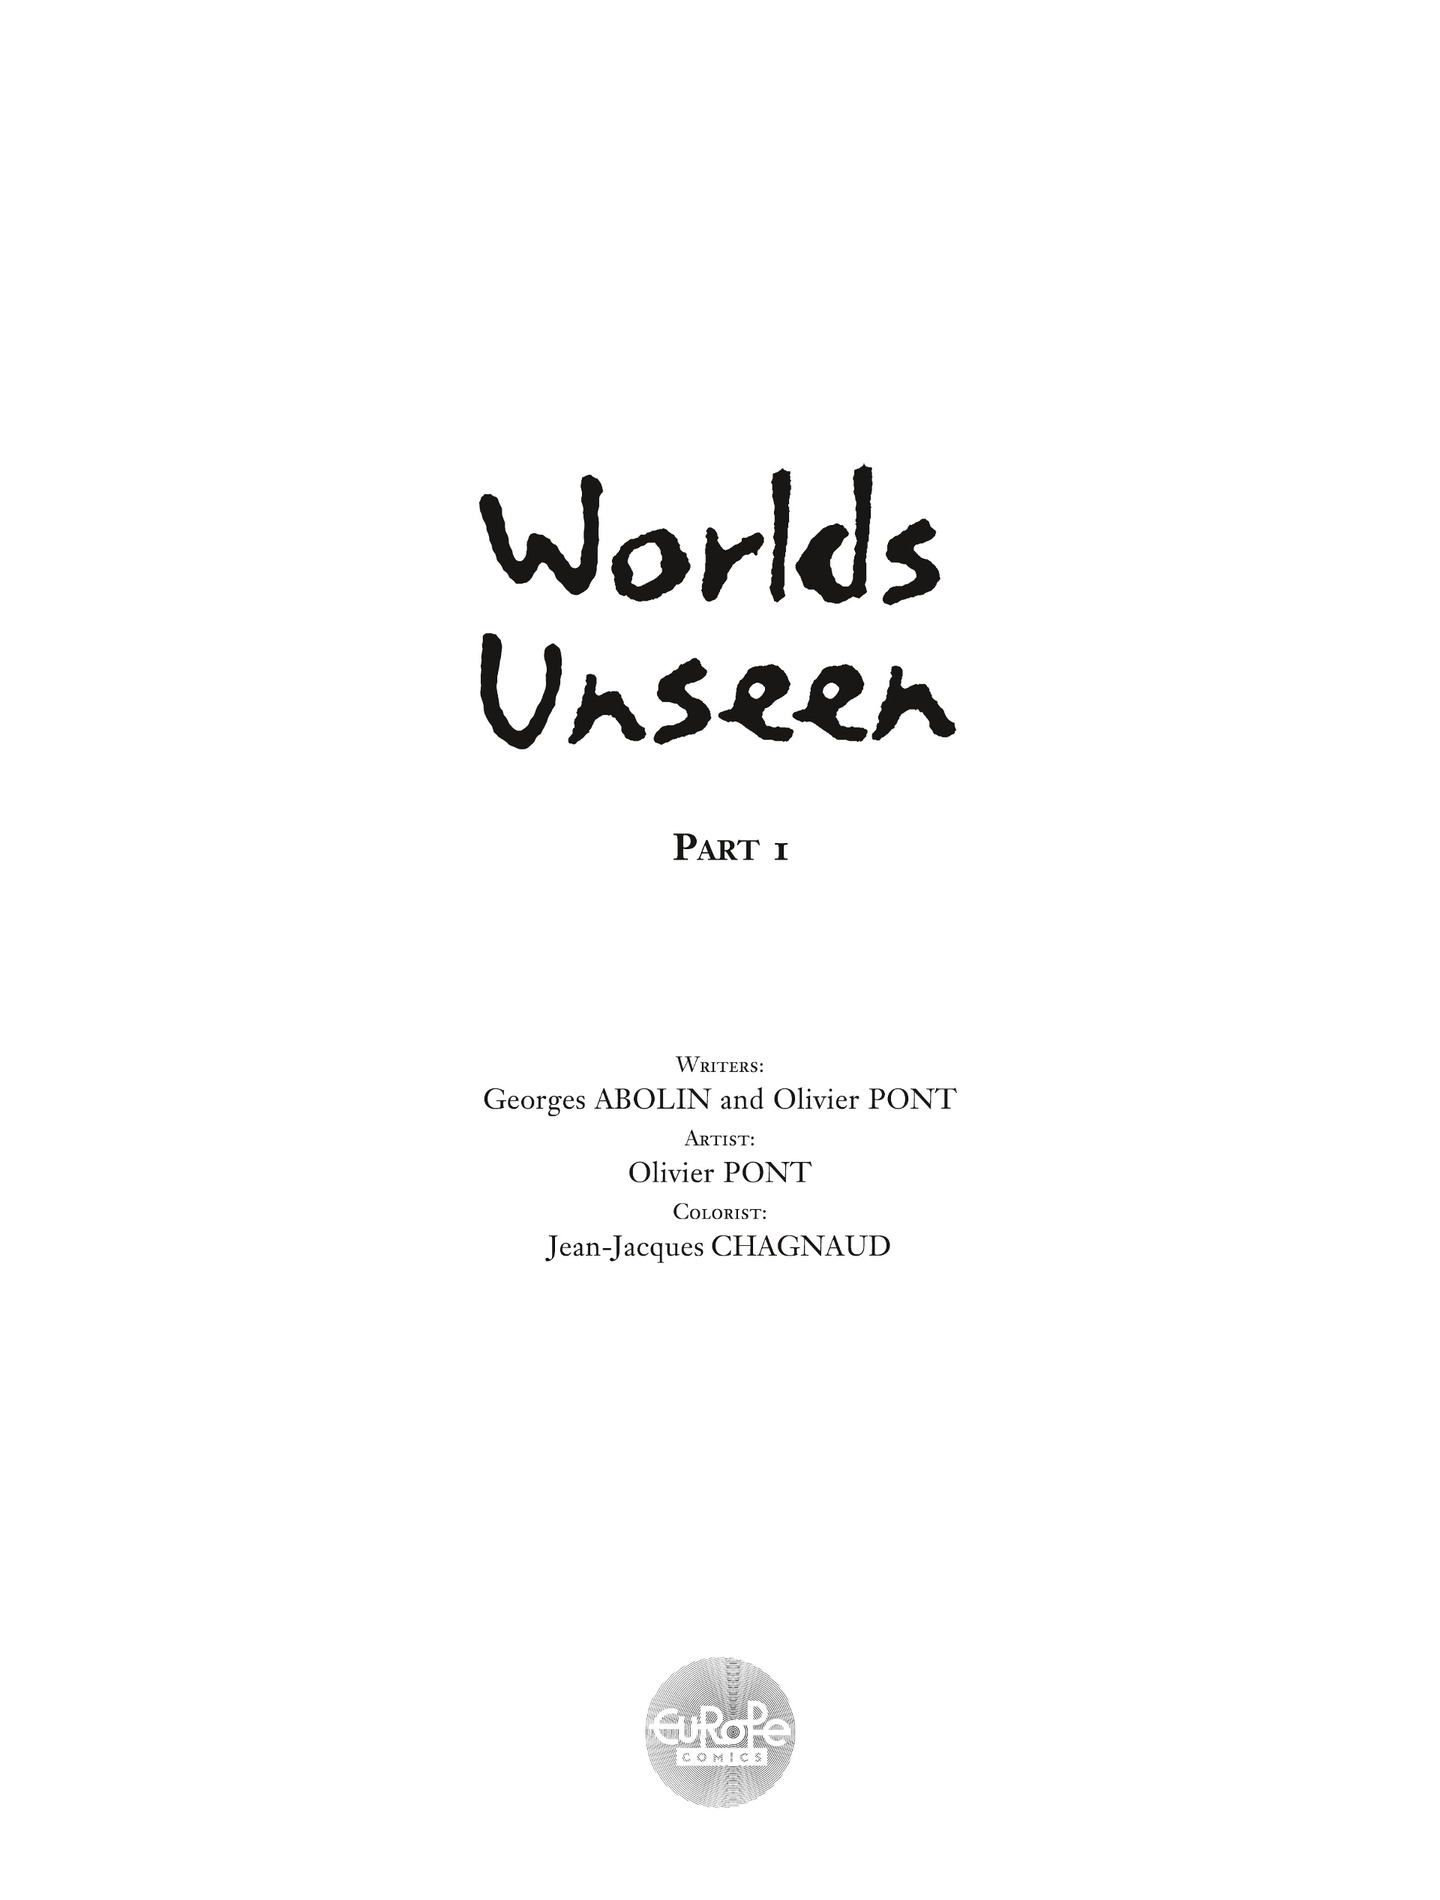 Read online Worlds Unseen comic -  Issue # TPB 1 - 2